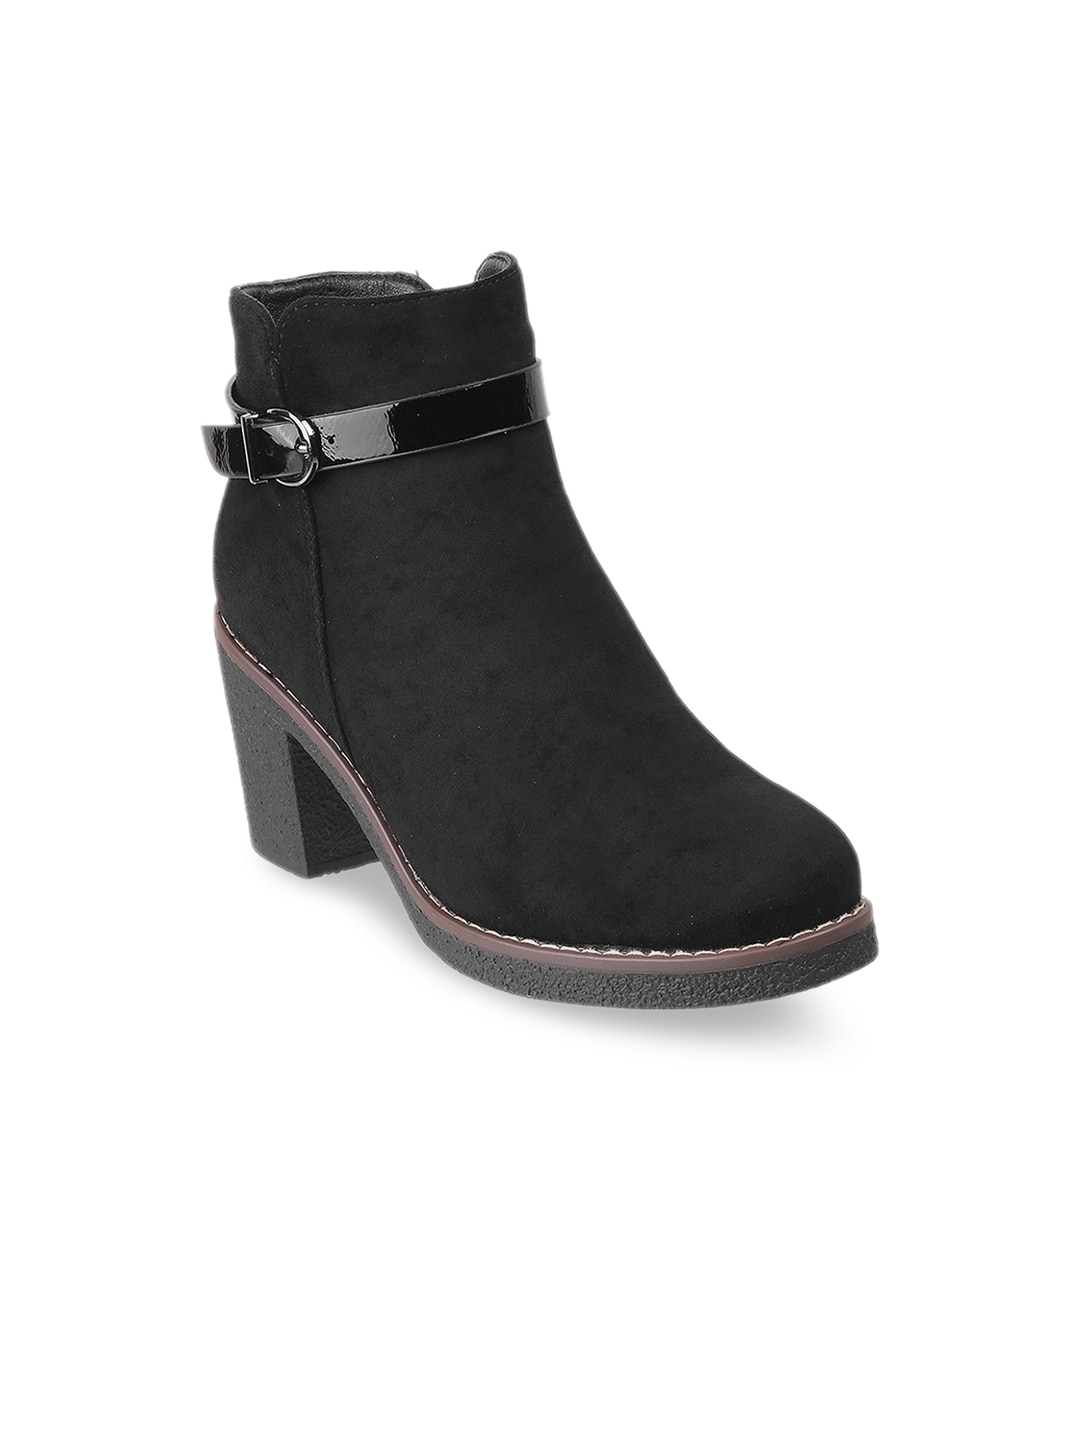 Mochi Black Solid Block Heeled Boots with Buckles Price in India